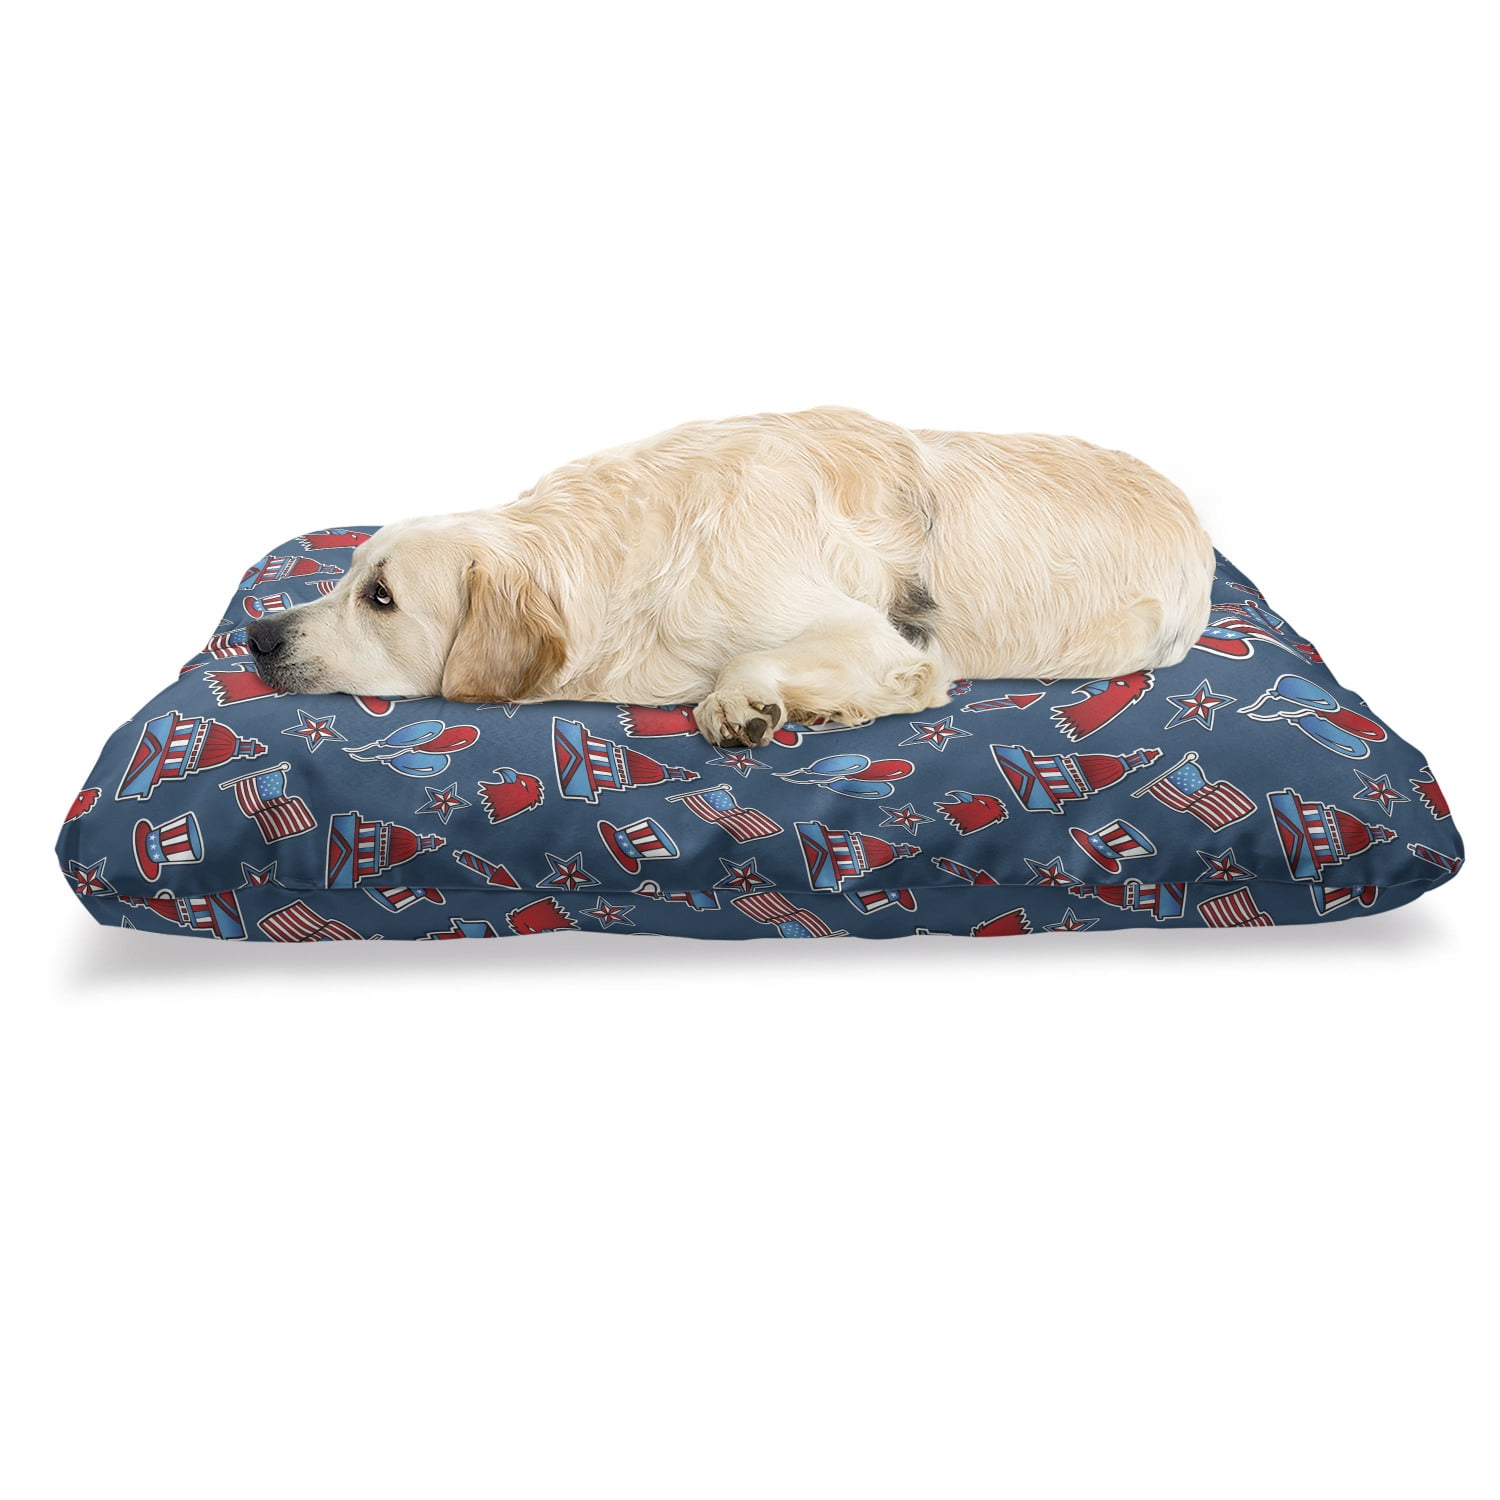 Washable Reversible Select Your Size Free Embroidery Patriotic Dog Bed 